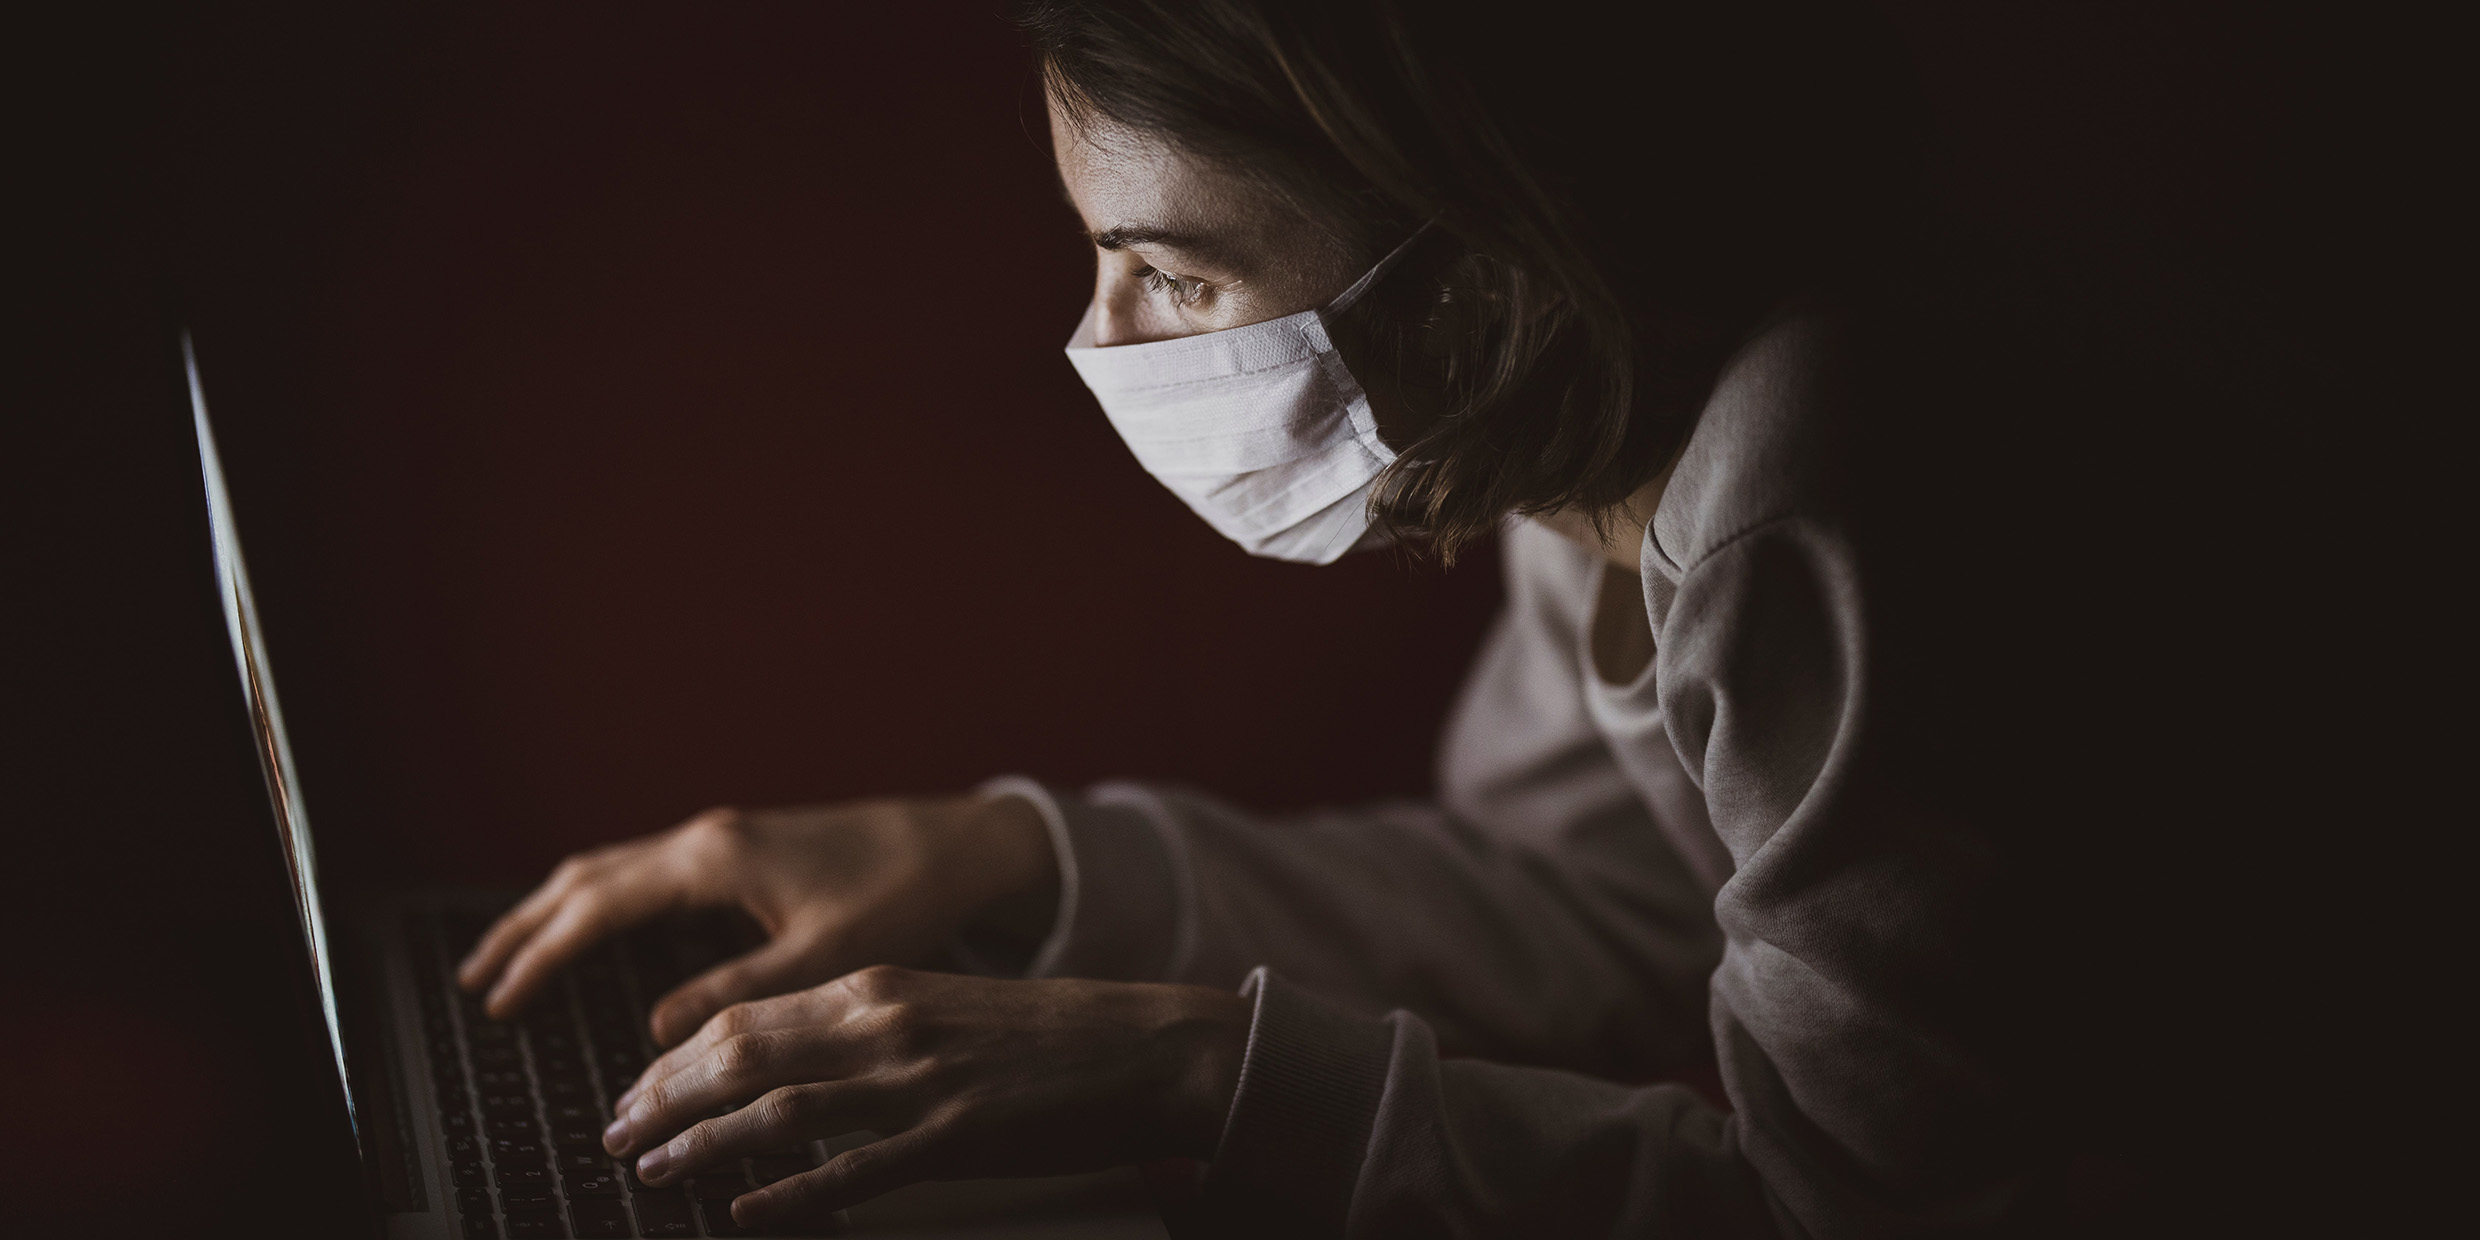 Image of woman wearing mask working at computer